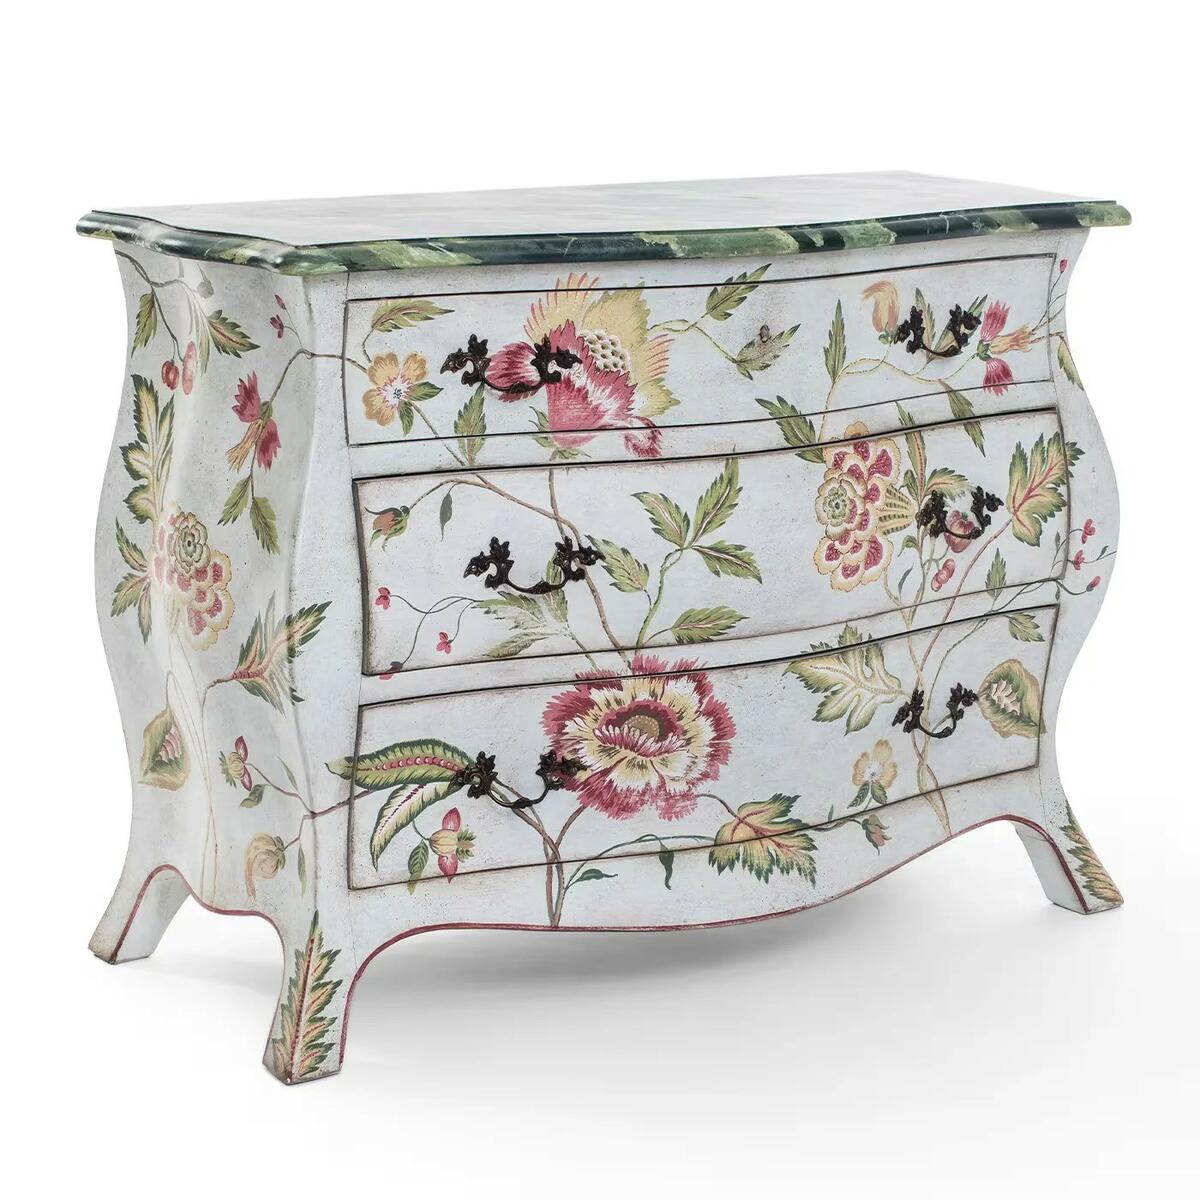 The Asolo chest by Porte Italia at Somerselle